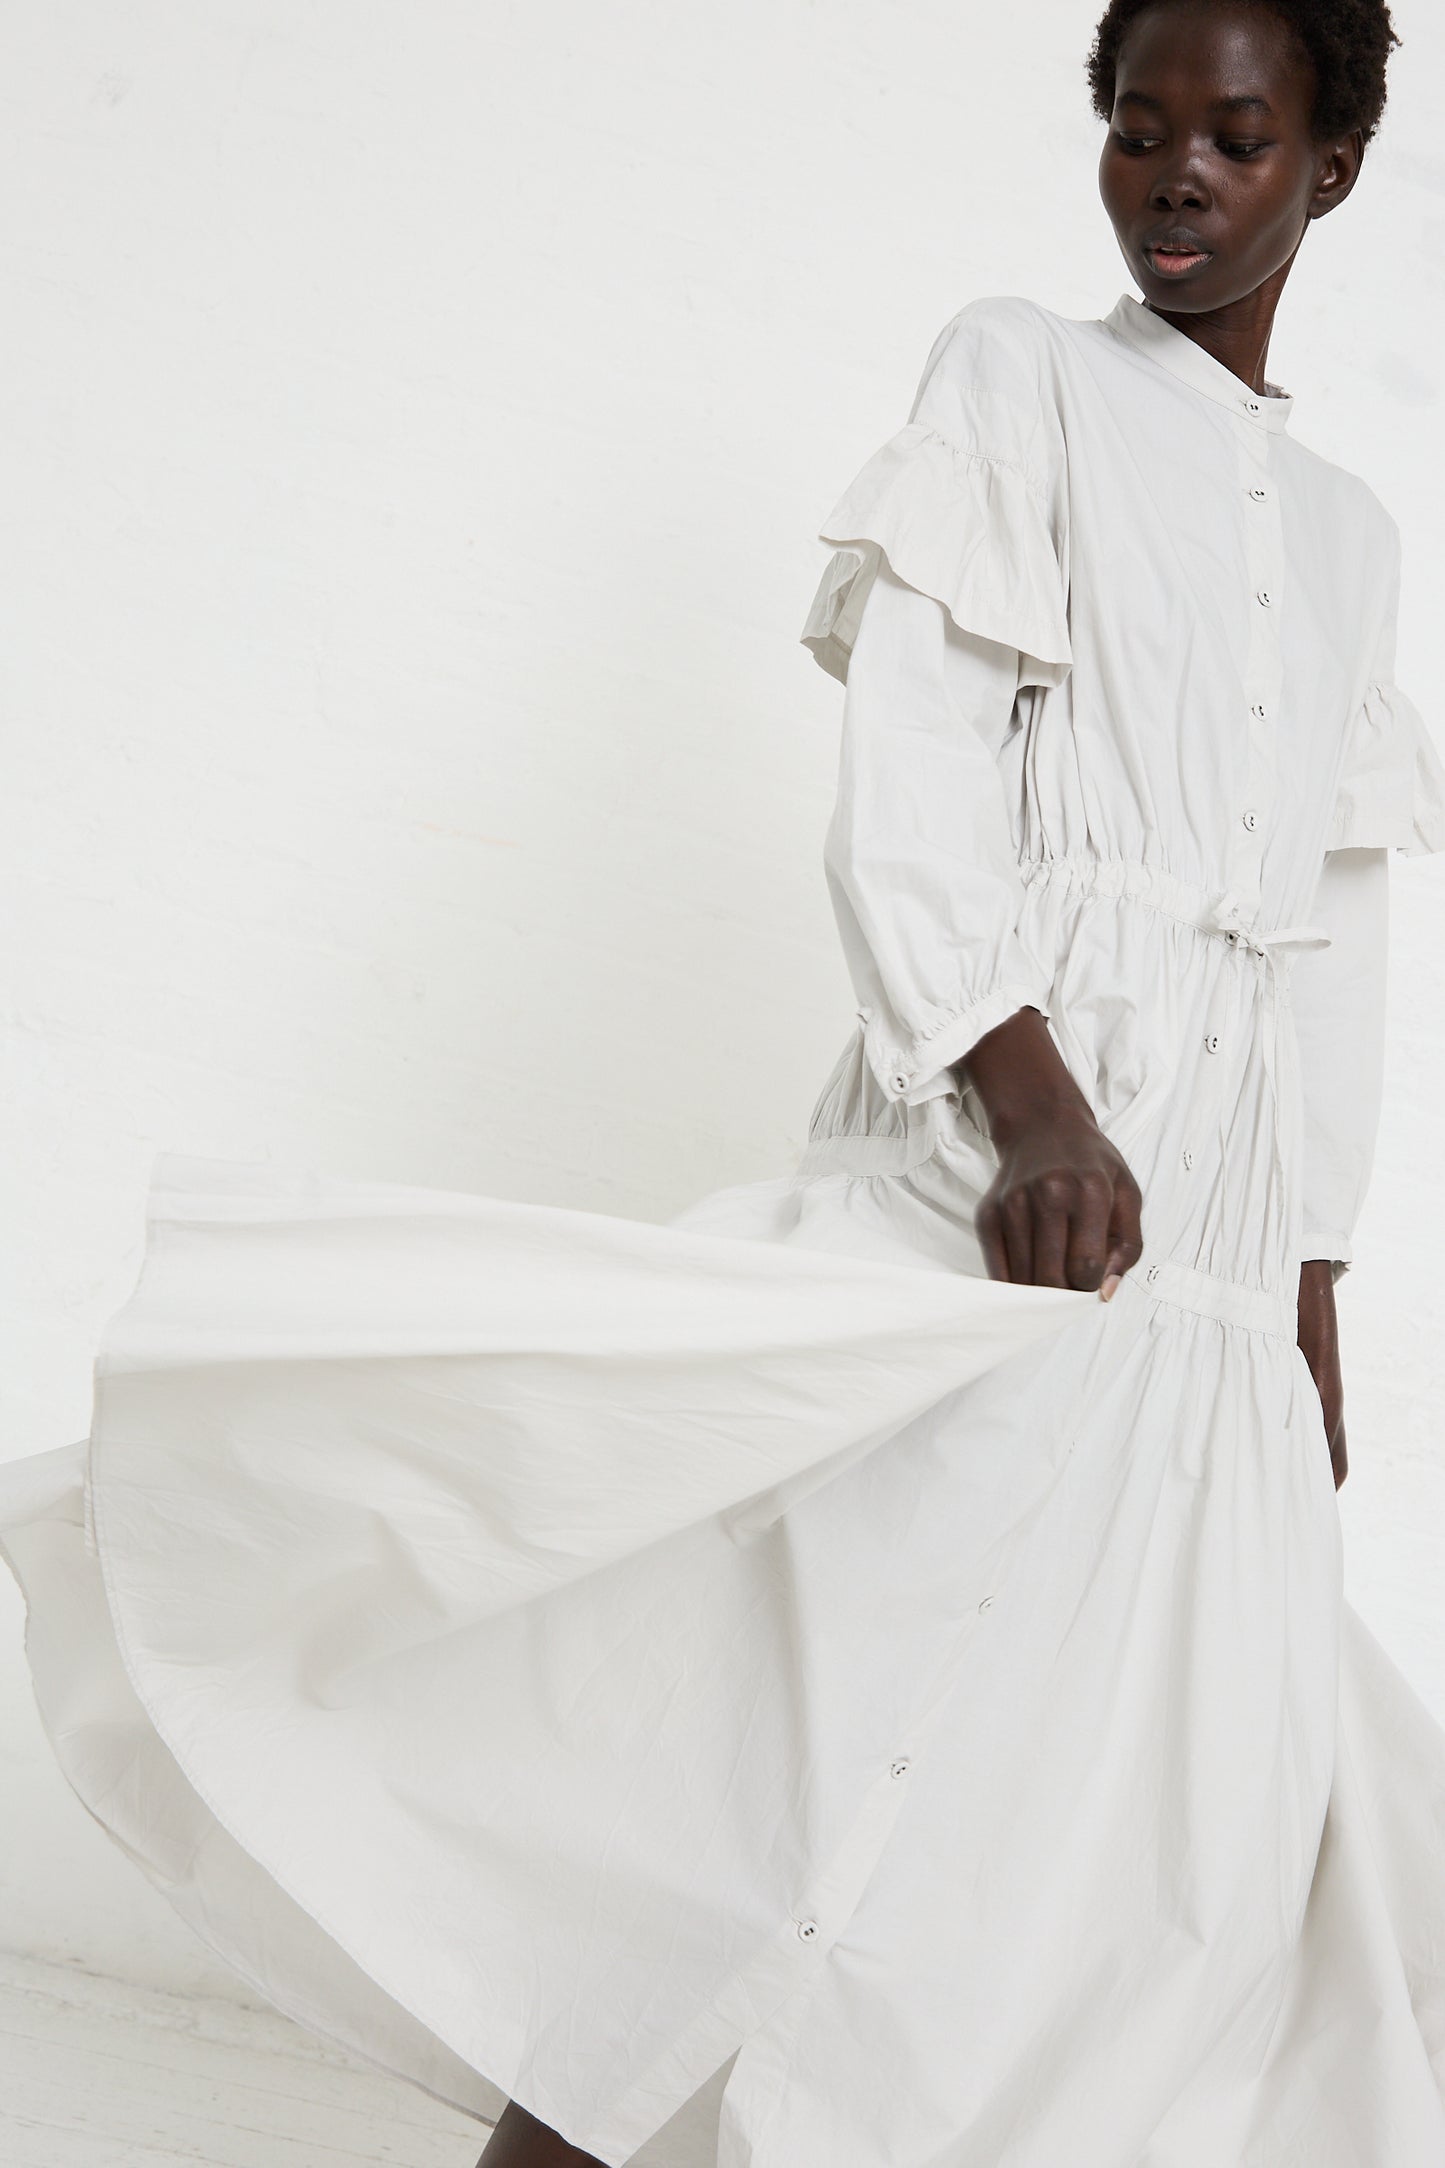 A person wearing a long white Cotton Chemise à la Reine in Turnip with ruffled sleeves and button details by Hallelujah, handmade in Kyoto, poses against a plain white background. The dress flows outward as they extend their arm.